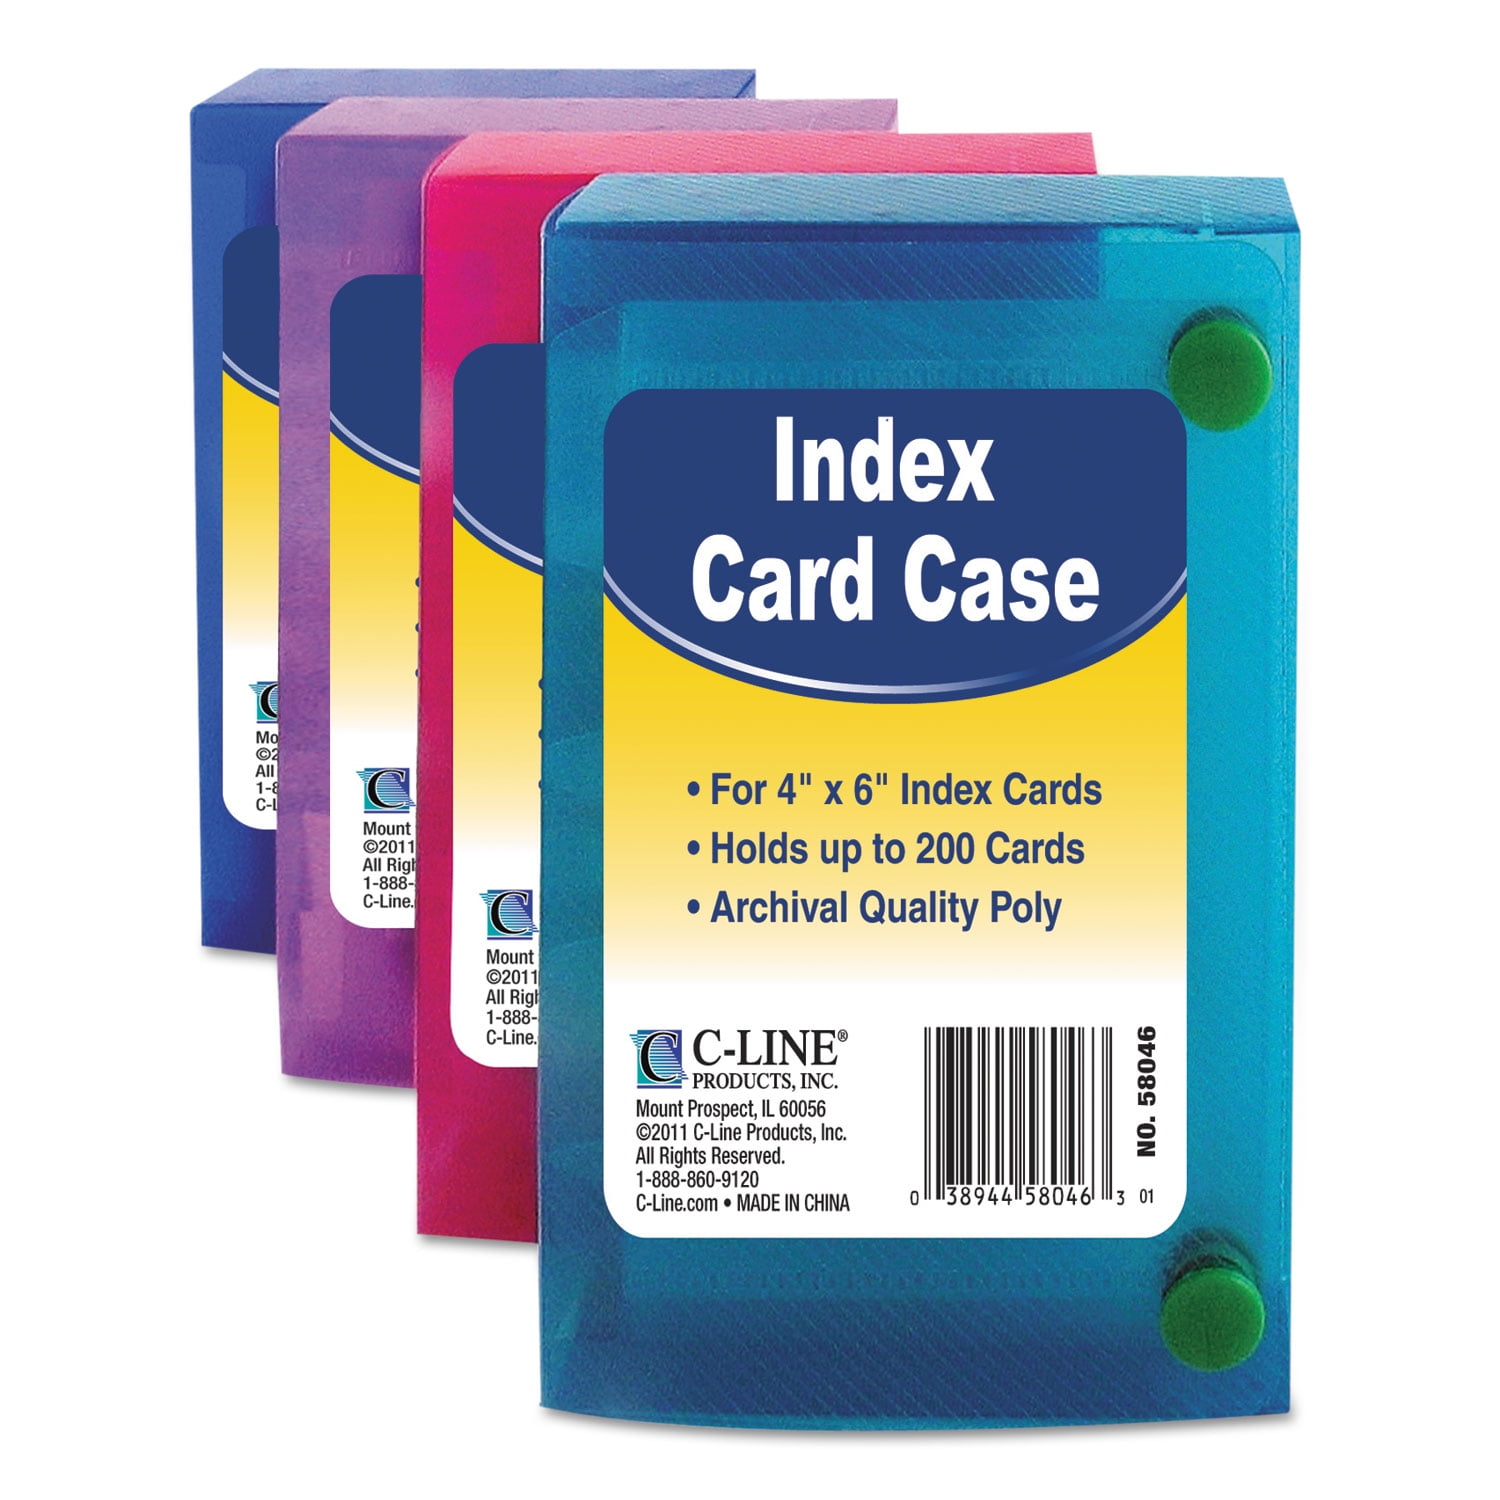 Index Card Case, 4x6 Inch Index Card Holder, Fits Up to 200 Cards Per Case  - with 5 Dividers and Adhesive Label Tabs - Store Recipe Cards, School